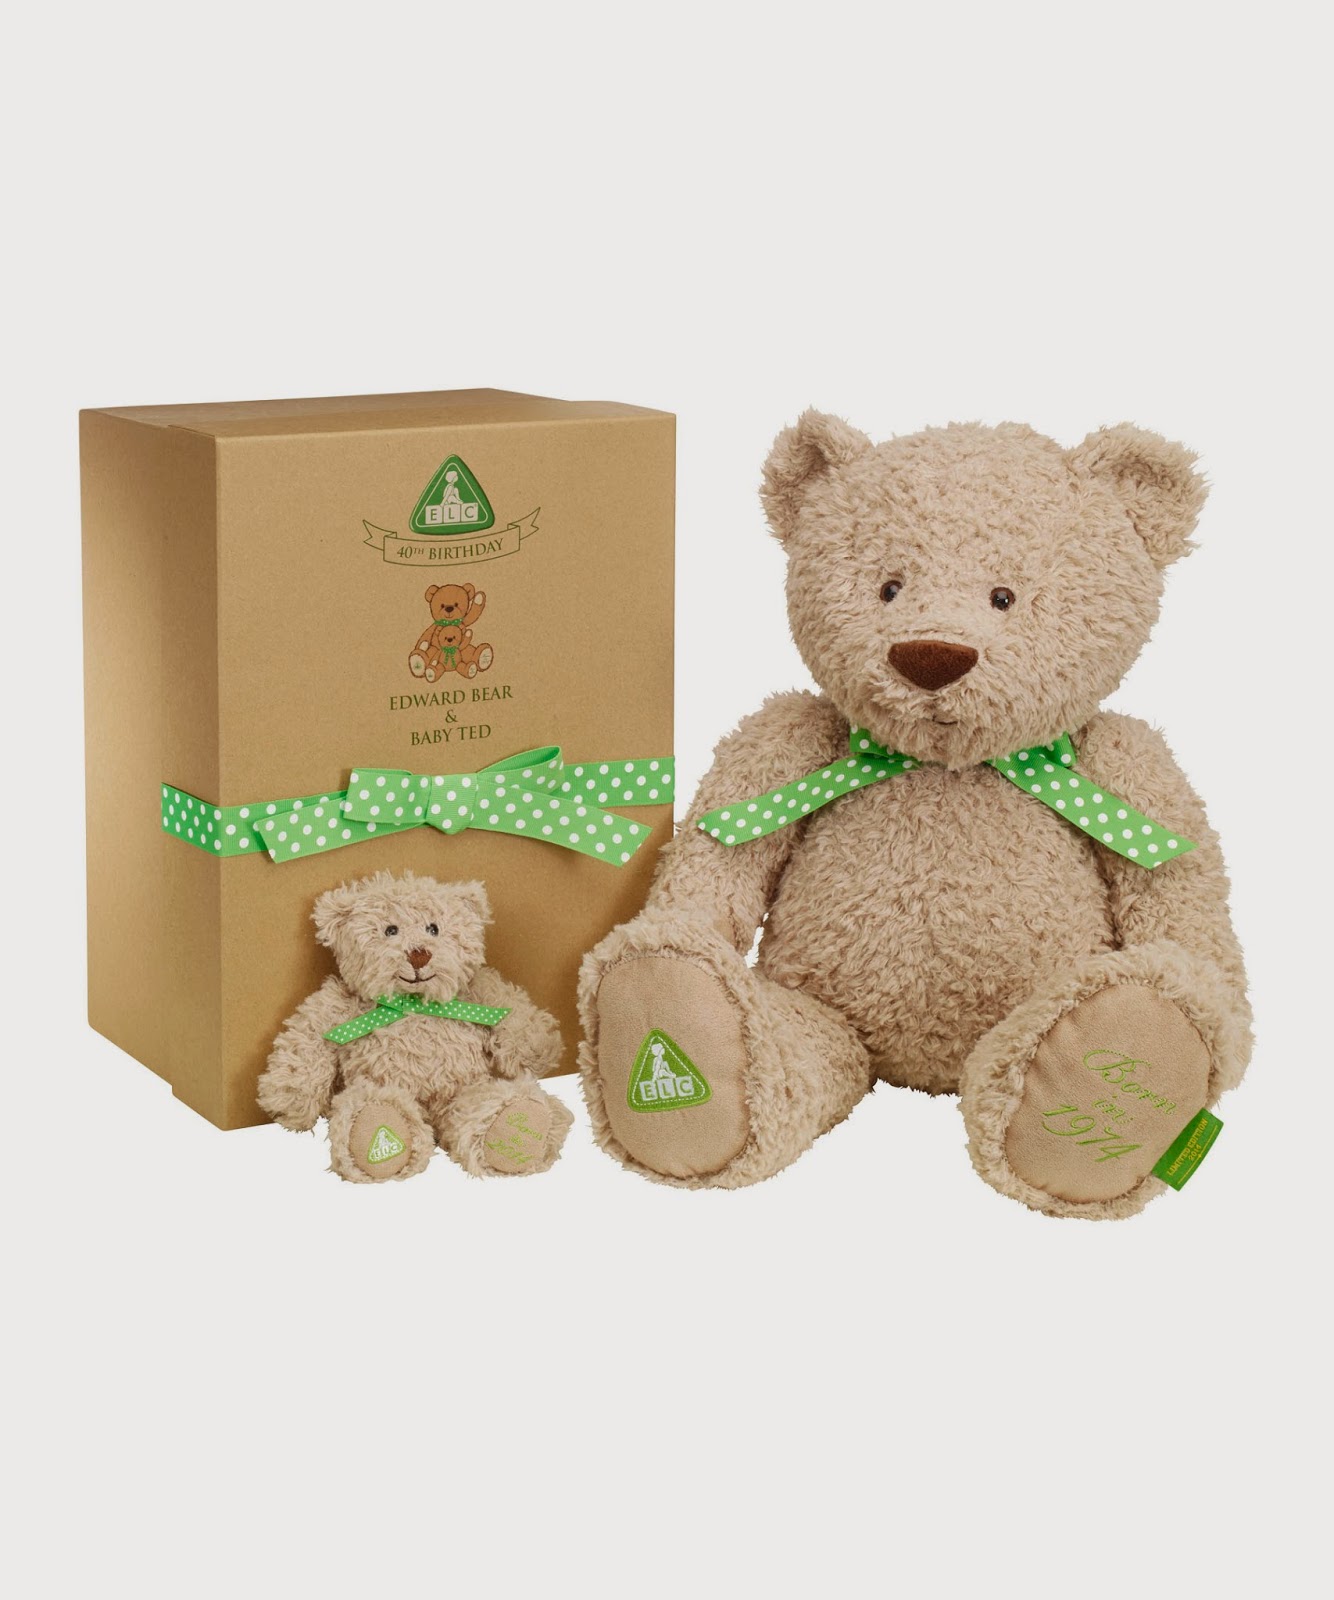 Happy 40th Birthday to ELC and Limited Edition Teddy *GIVEAWAY* | early learning cent elf | mothercare | giveaway | competition | birthday | 40th birthday | teddy | 300 limited edition teddy | mamasVIB | competition | birthday gift | born in 1974 | born in 2014 | 40th birthday | babies gift | teddies | edward ted | small teddy | gifts | birthday presents | ELC